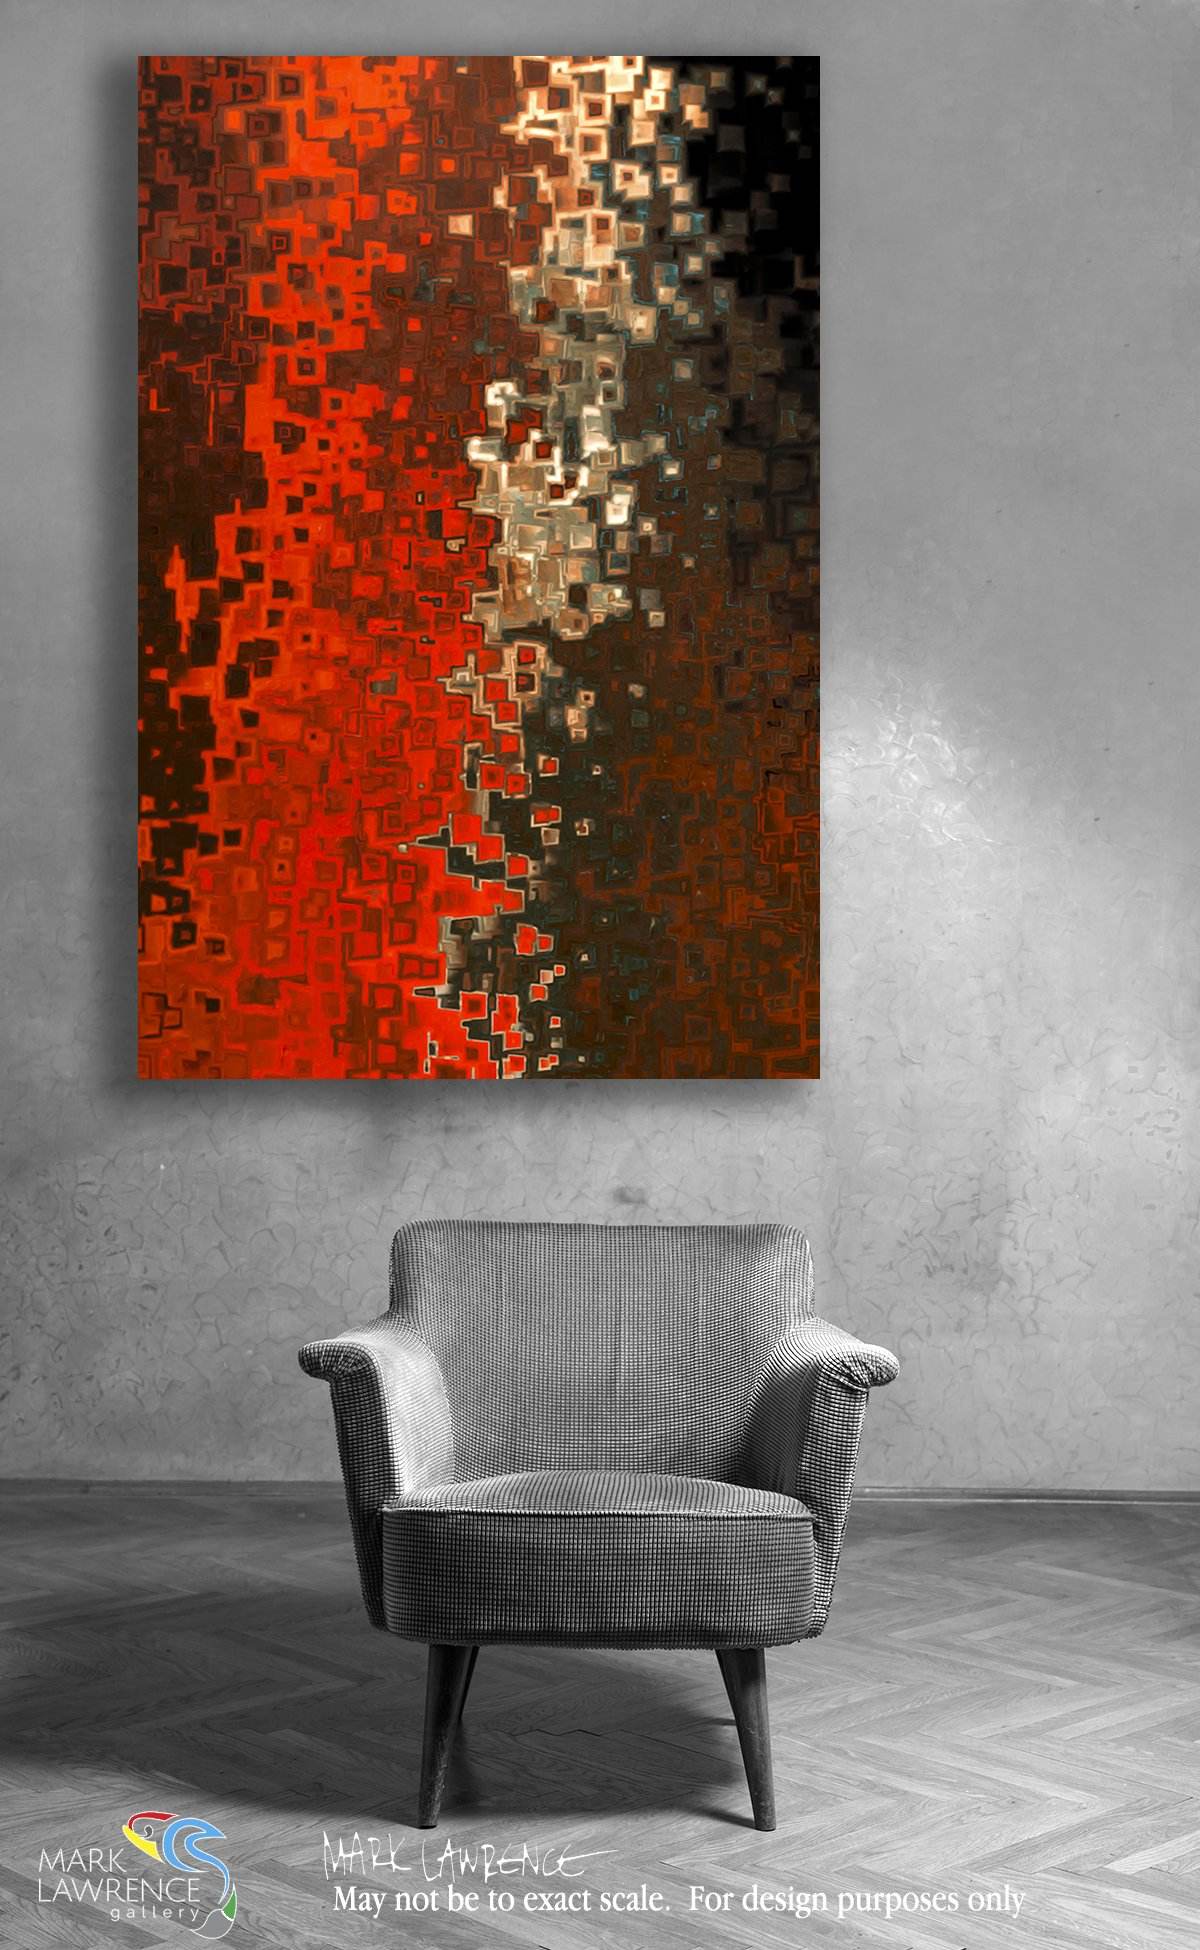 James 5:16. Praying for a Change. Christian themed limited edition art. Ultra-hand textured and embellished with brush strokes by the artist. Signed and numbered inspirational abstract art. Share your faith with art!